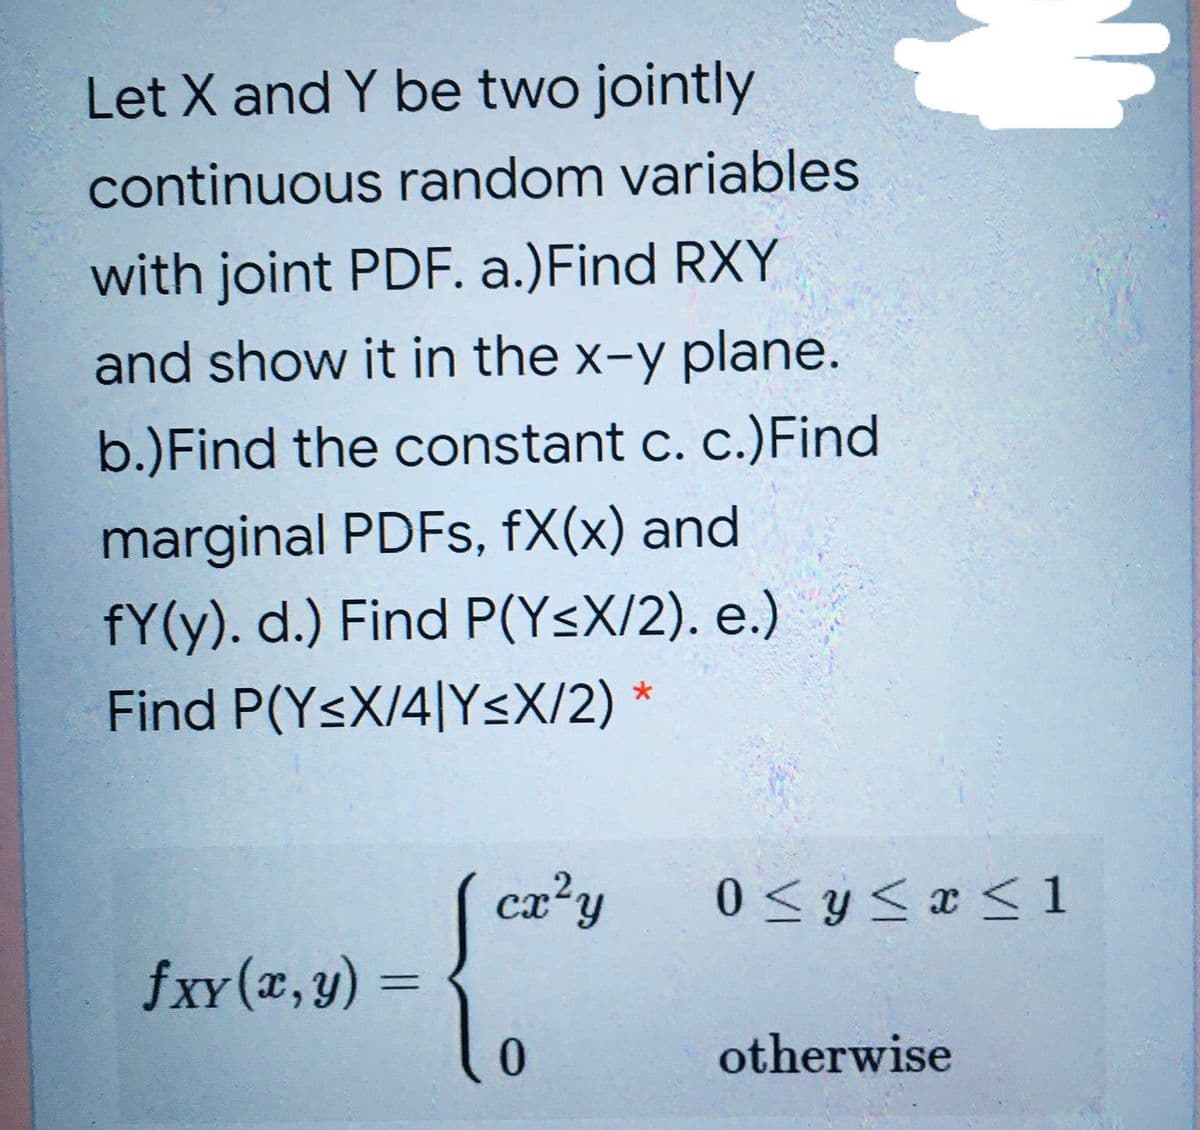 Let X and Y be two jointly
continuous random variables
with joint PDF. a.)Find RXY
and show it in the x-y plane.
b.)Find the constant c. c.)Find
marginal PDFS, fX(x) and
fY(y). d.) Find P(Y<X/2). e.)
Find P(YsX/4|YsX/2) *
cx?y
0 < y< x < 1
fxY (x,y) =
%3D
otherwise
